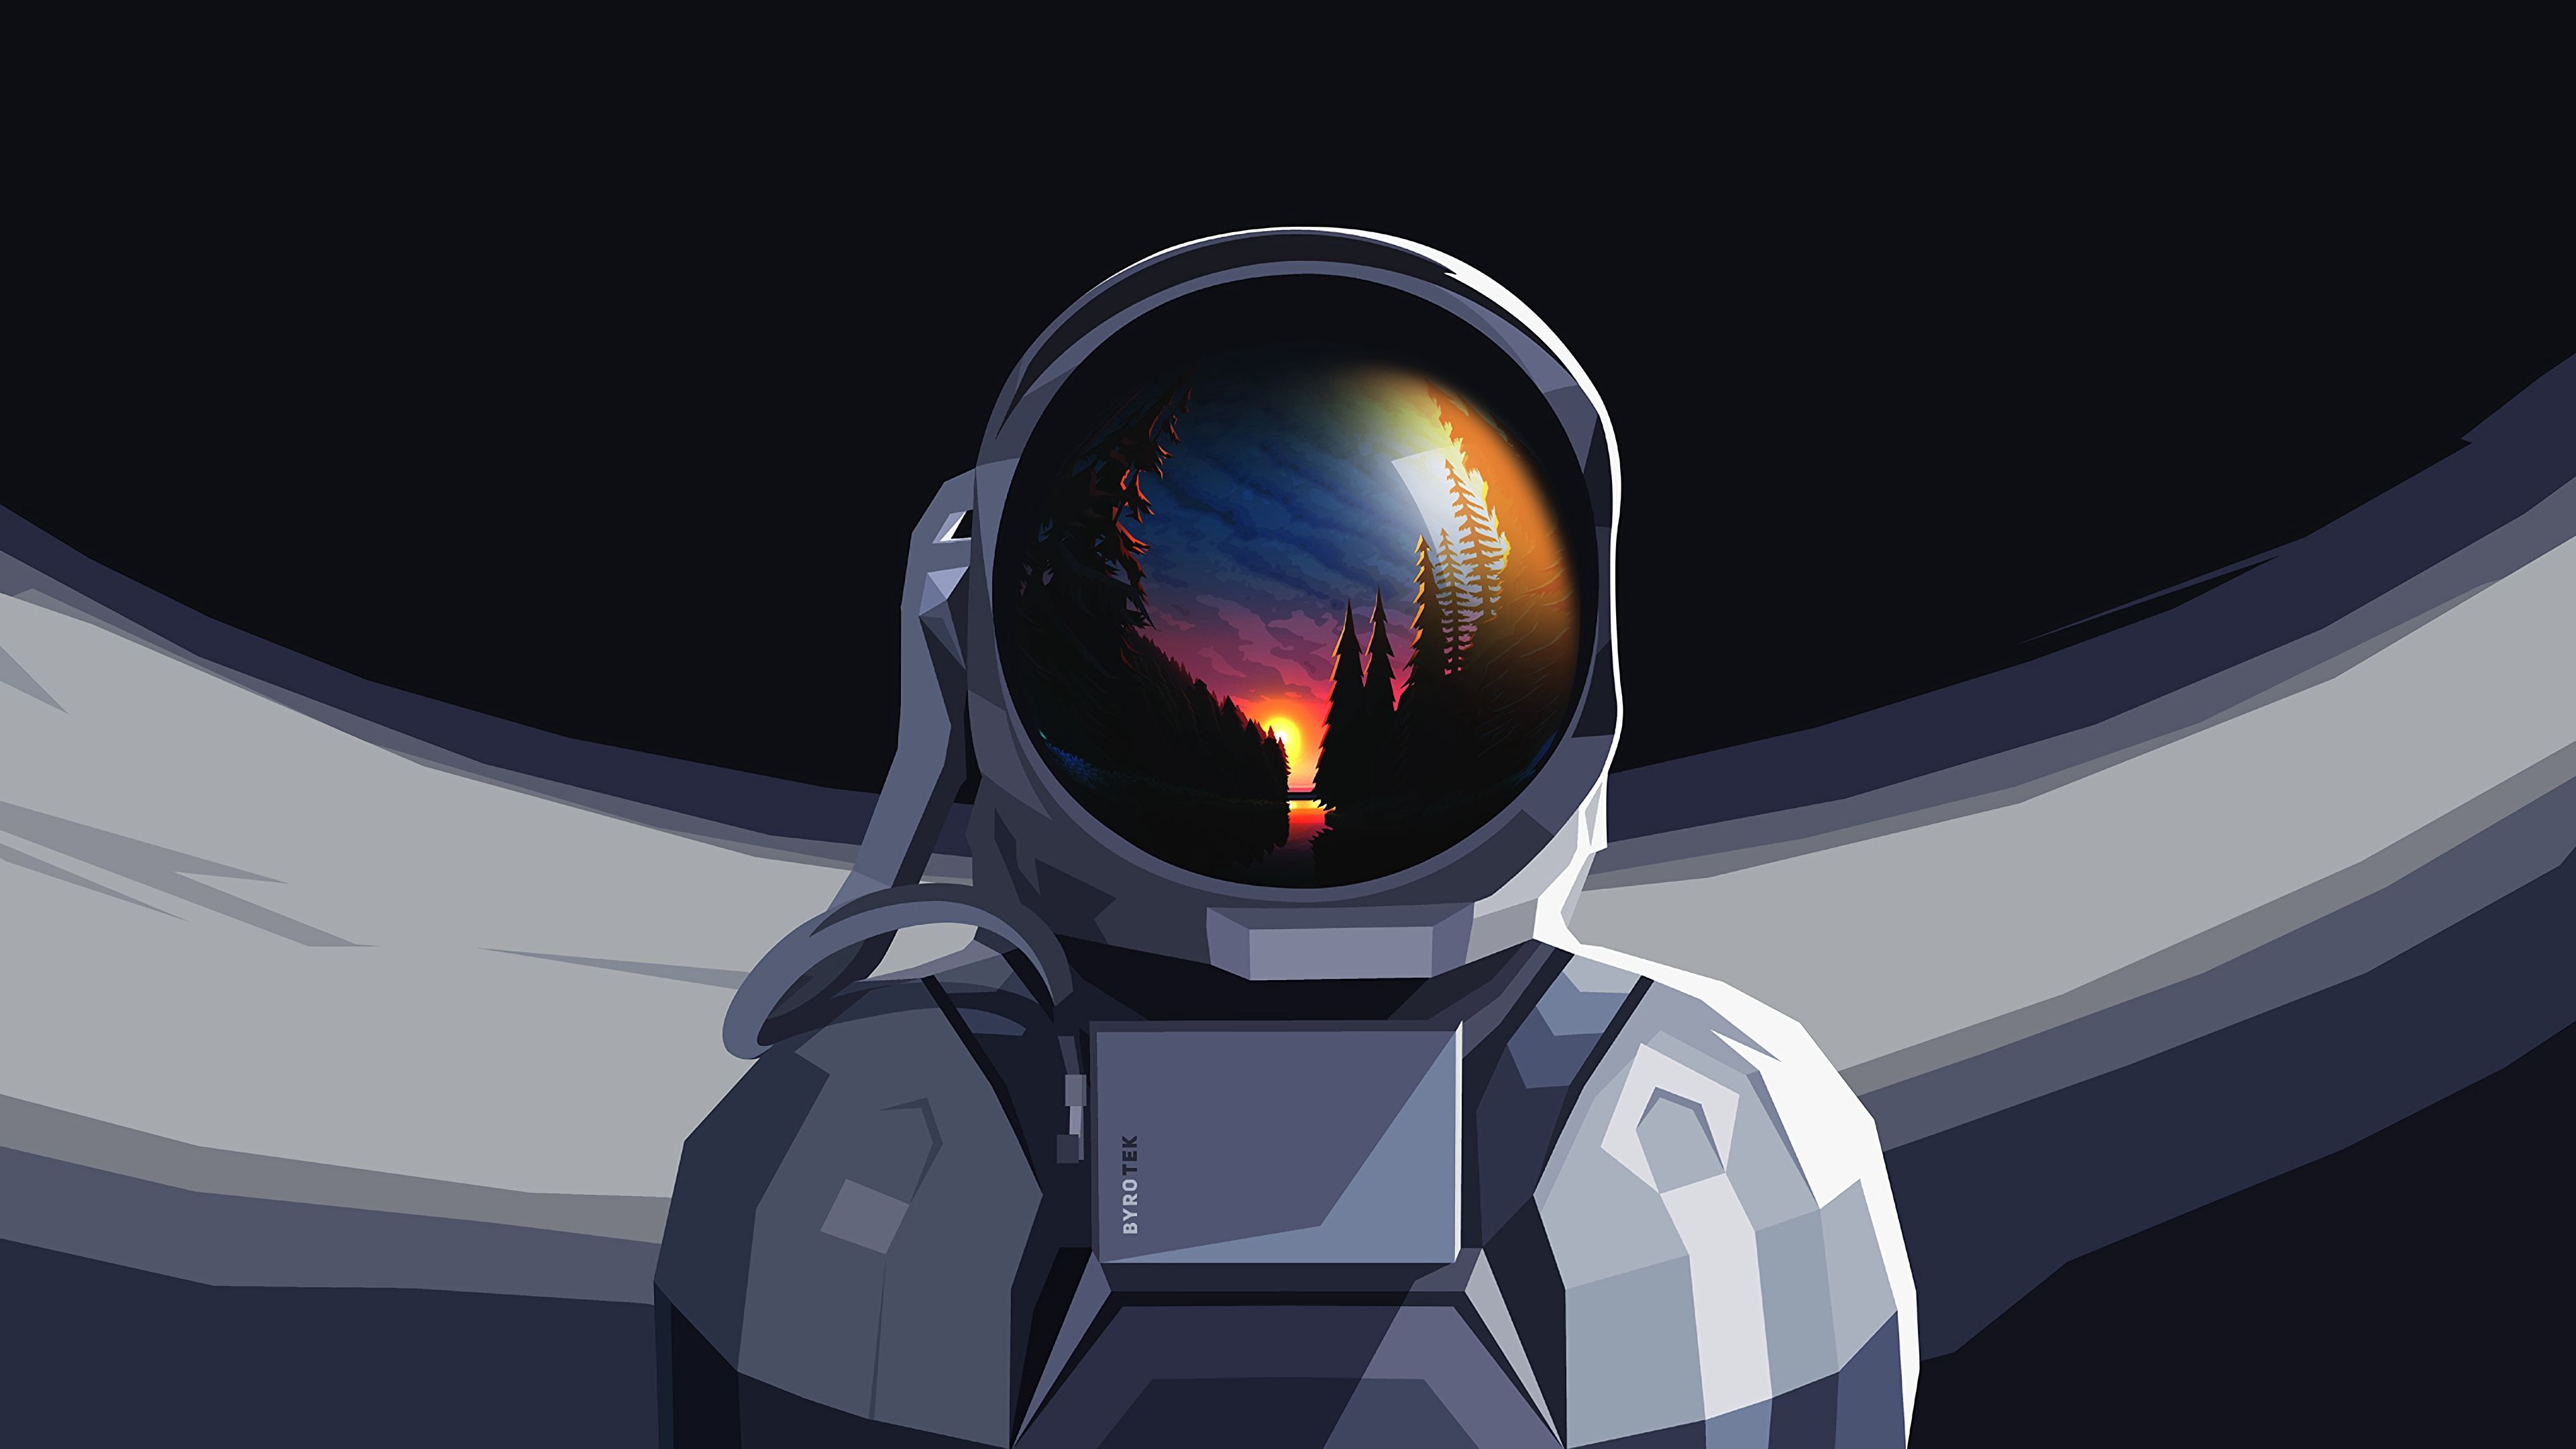 Astronaut 4K wallpaper for your desktop or mobile screen free and easy to download